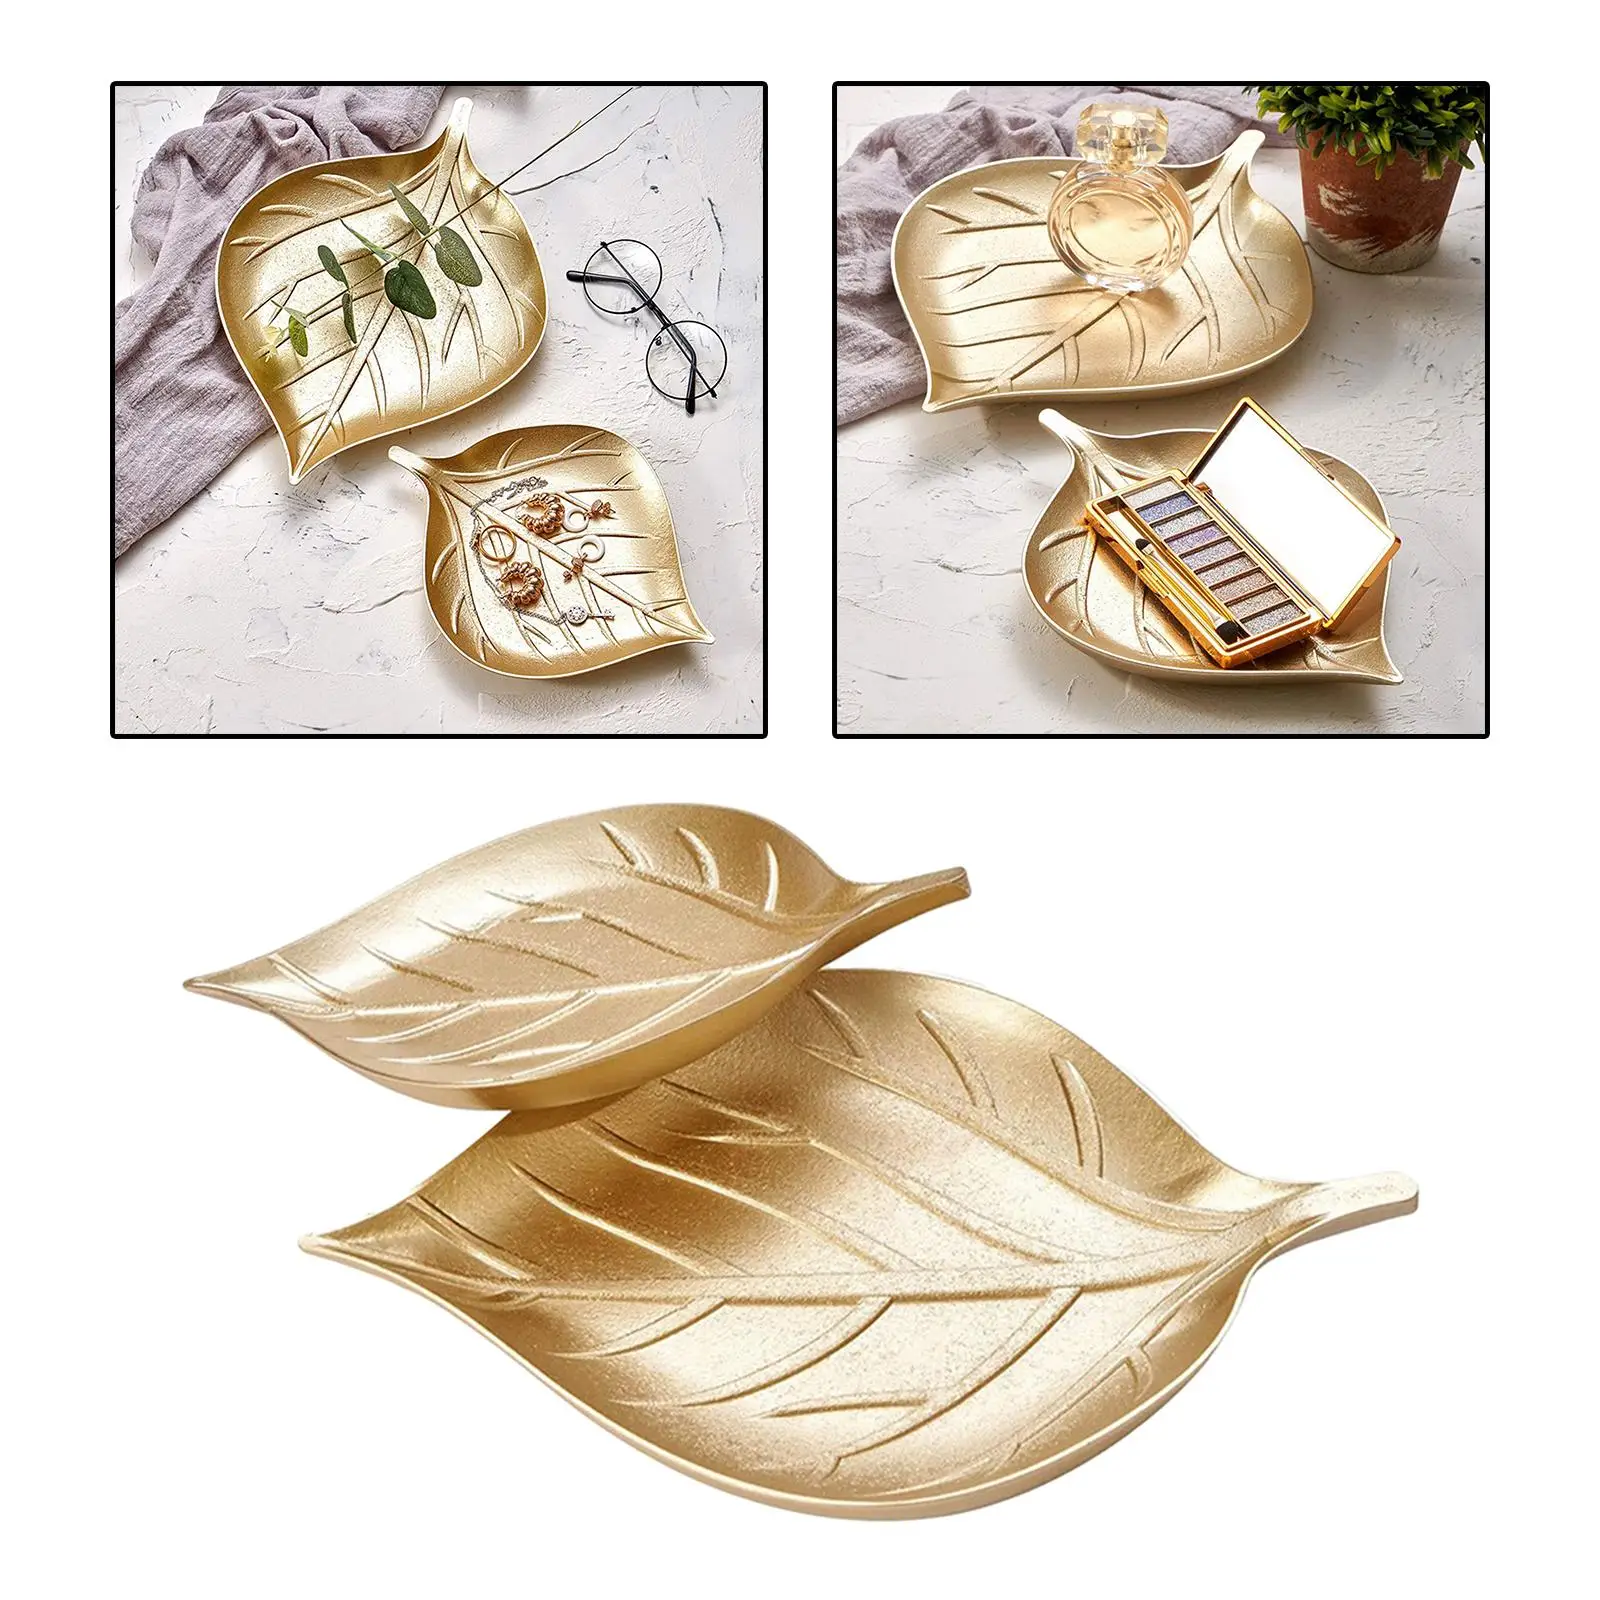 Gold Storage Plate Accessories Small Items Ornament Home Plate for Vanity Tray Desktop Decoration Bedroom Cosmetic